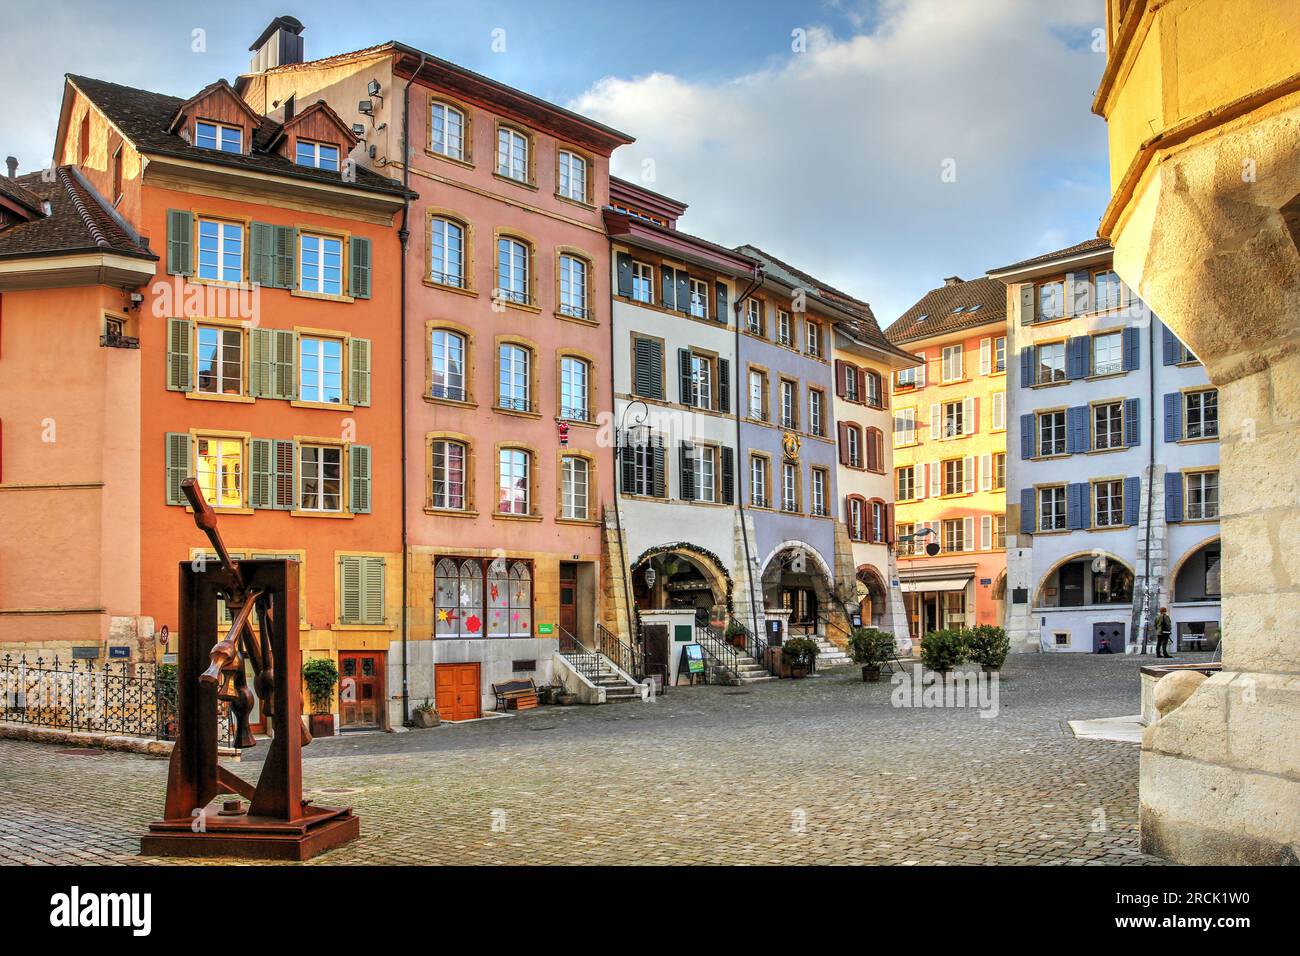 Houses in Ring Square, the center of the old town in Biel (or Bienne in French), Bern Canton, Switzerland. Most of the Guild houses in the square feat Stock Photo